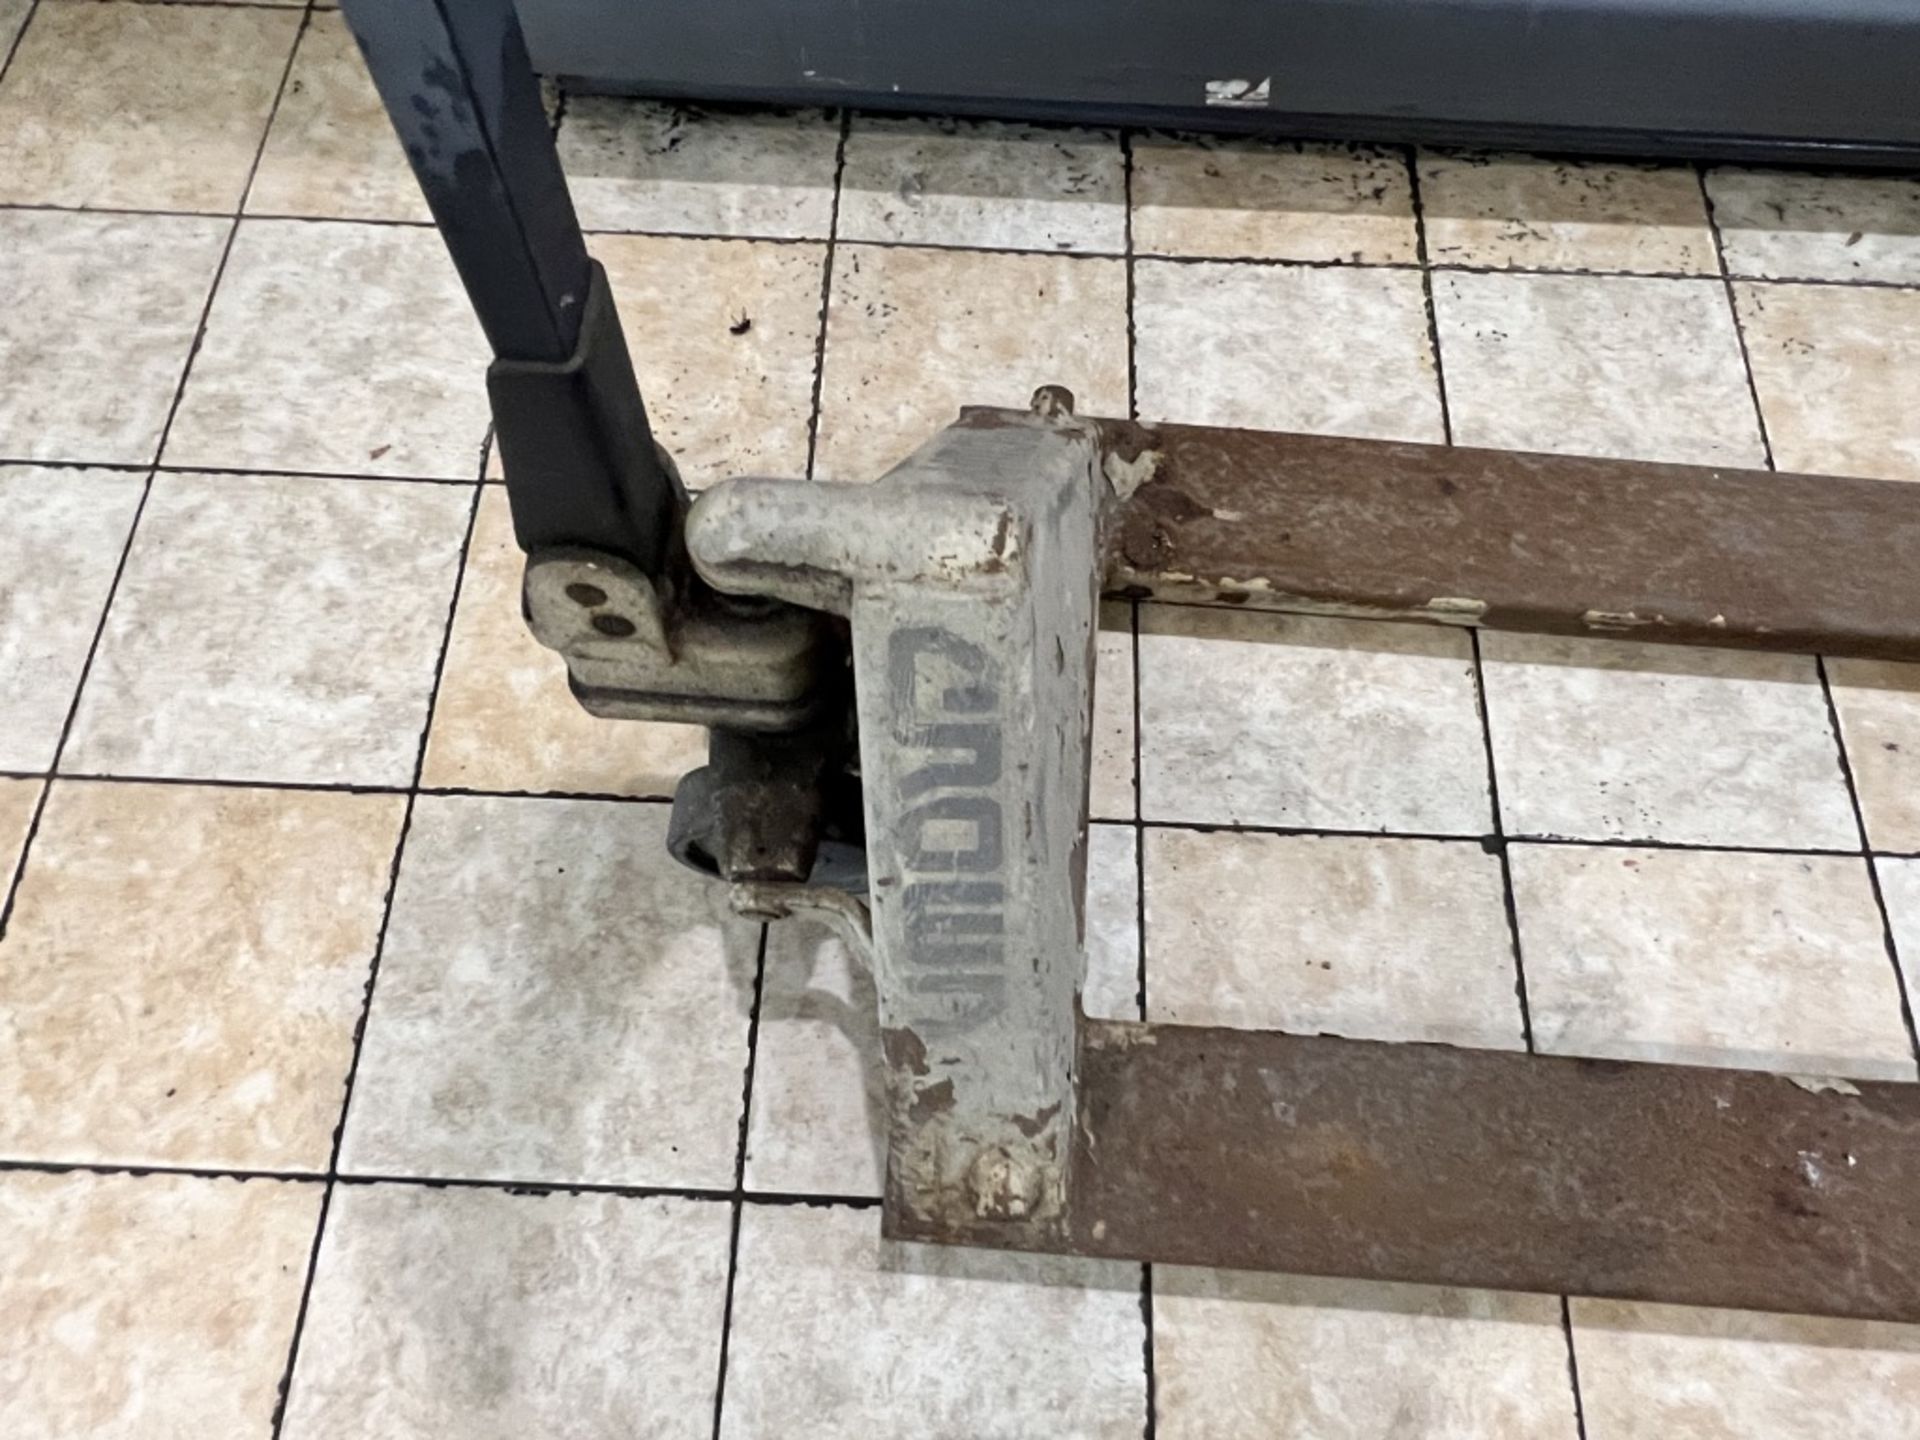 Crown Manual Pallet Jack, operational w/ signs of visible rust. - Image 3 of 9